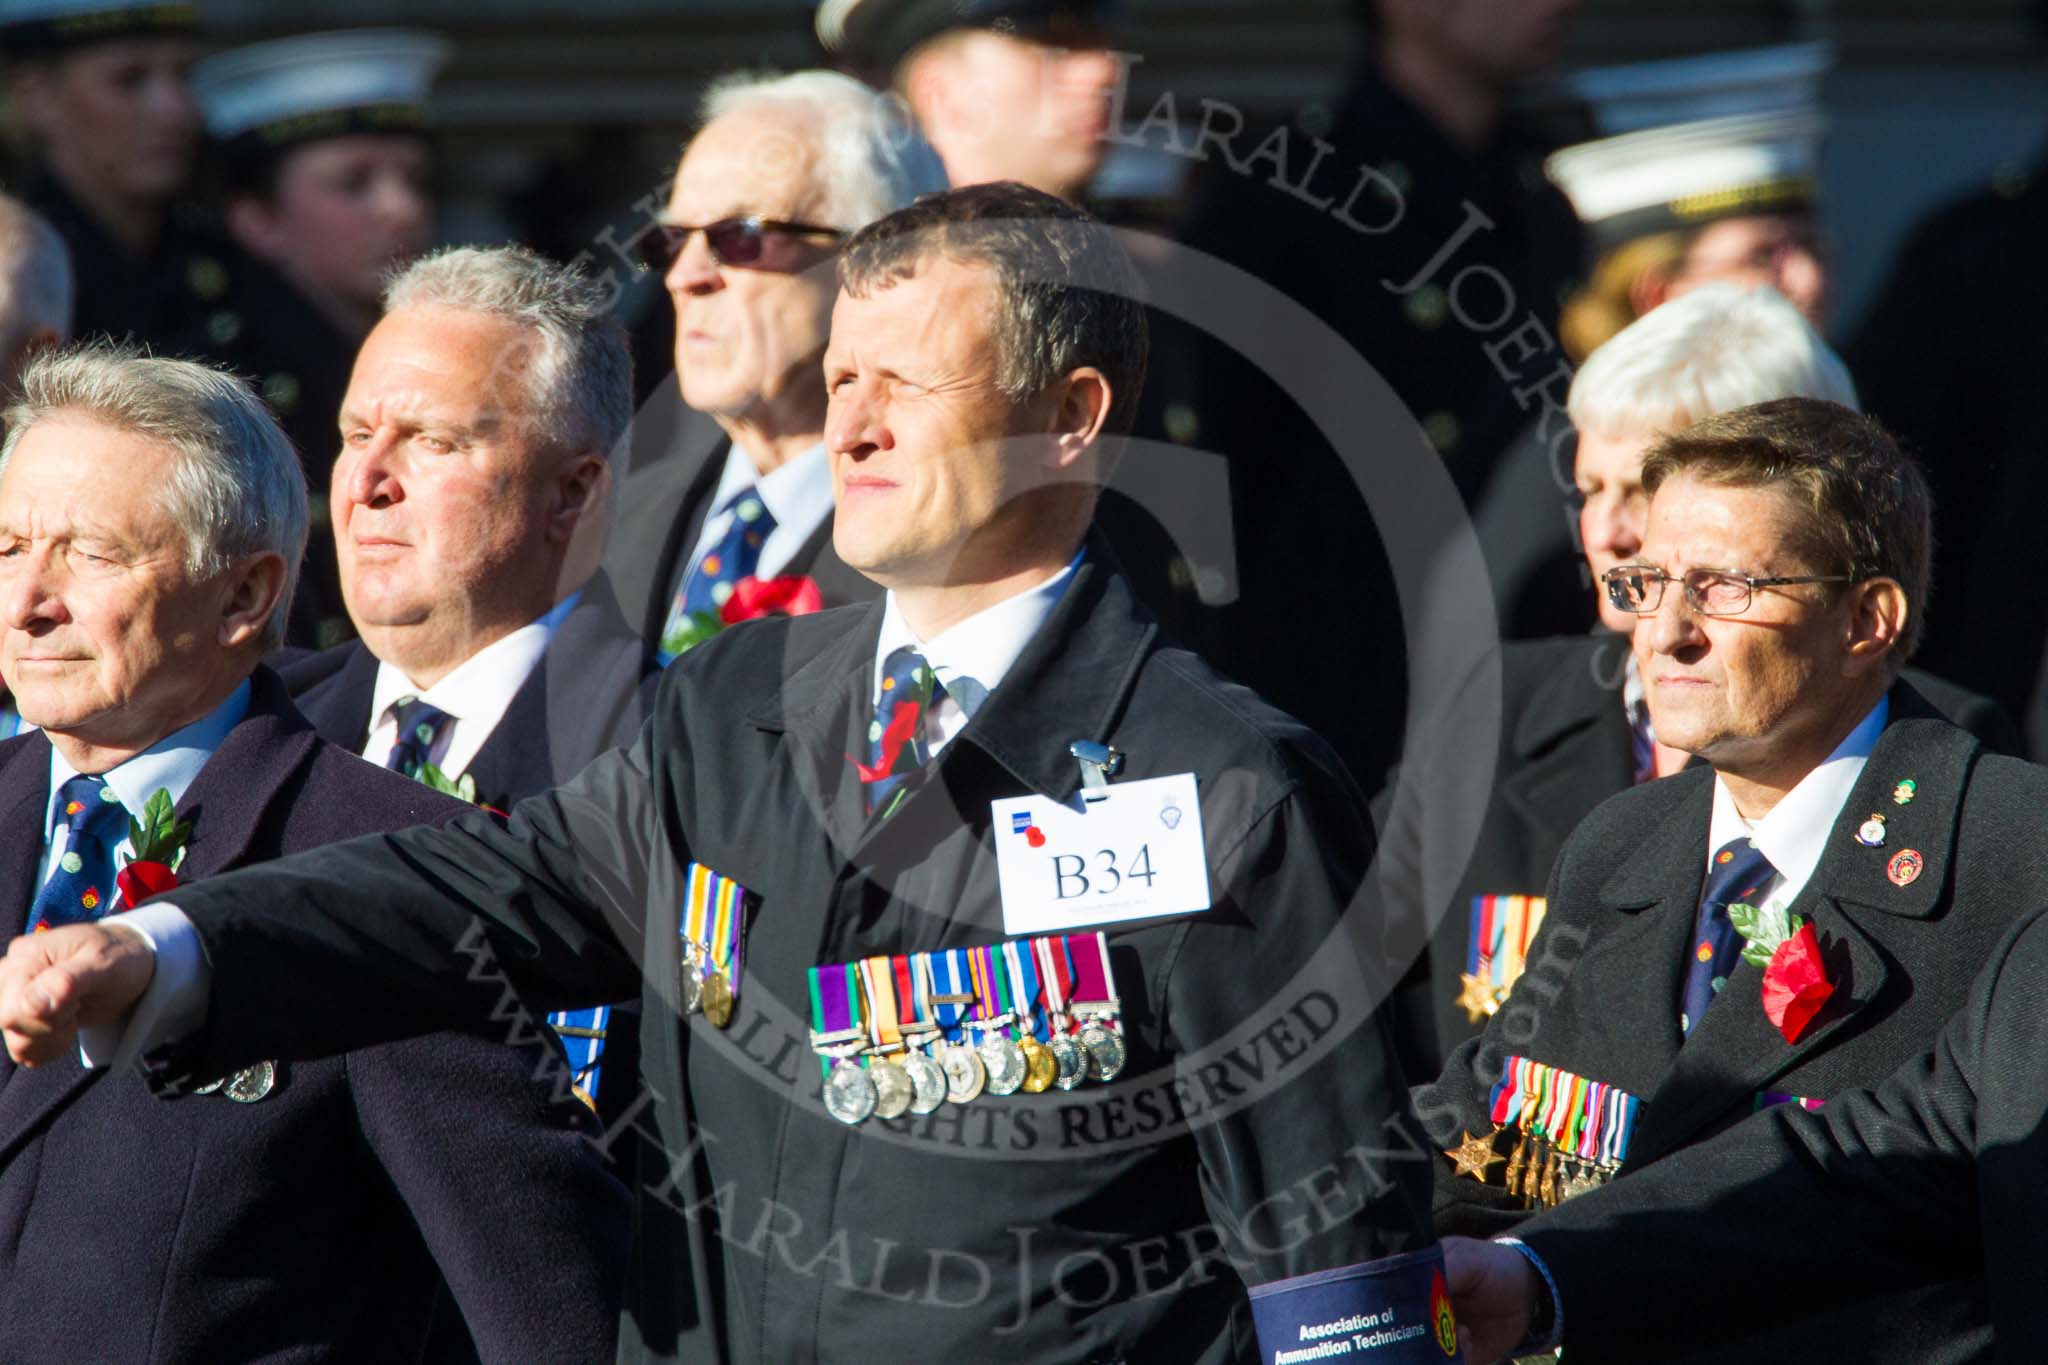 Remembrance Sunday at the Cenotaph in London 2014: Group B34 - Association of Ammunition Technicians.
Press stand opposite the Foreign Office building, Whitehall, London SW1,
London,
Greater London,
United Kingdom,
on 09 November 2014 at 12:14, image #1921